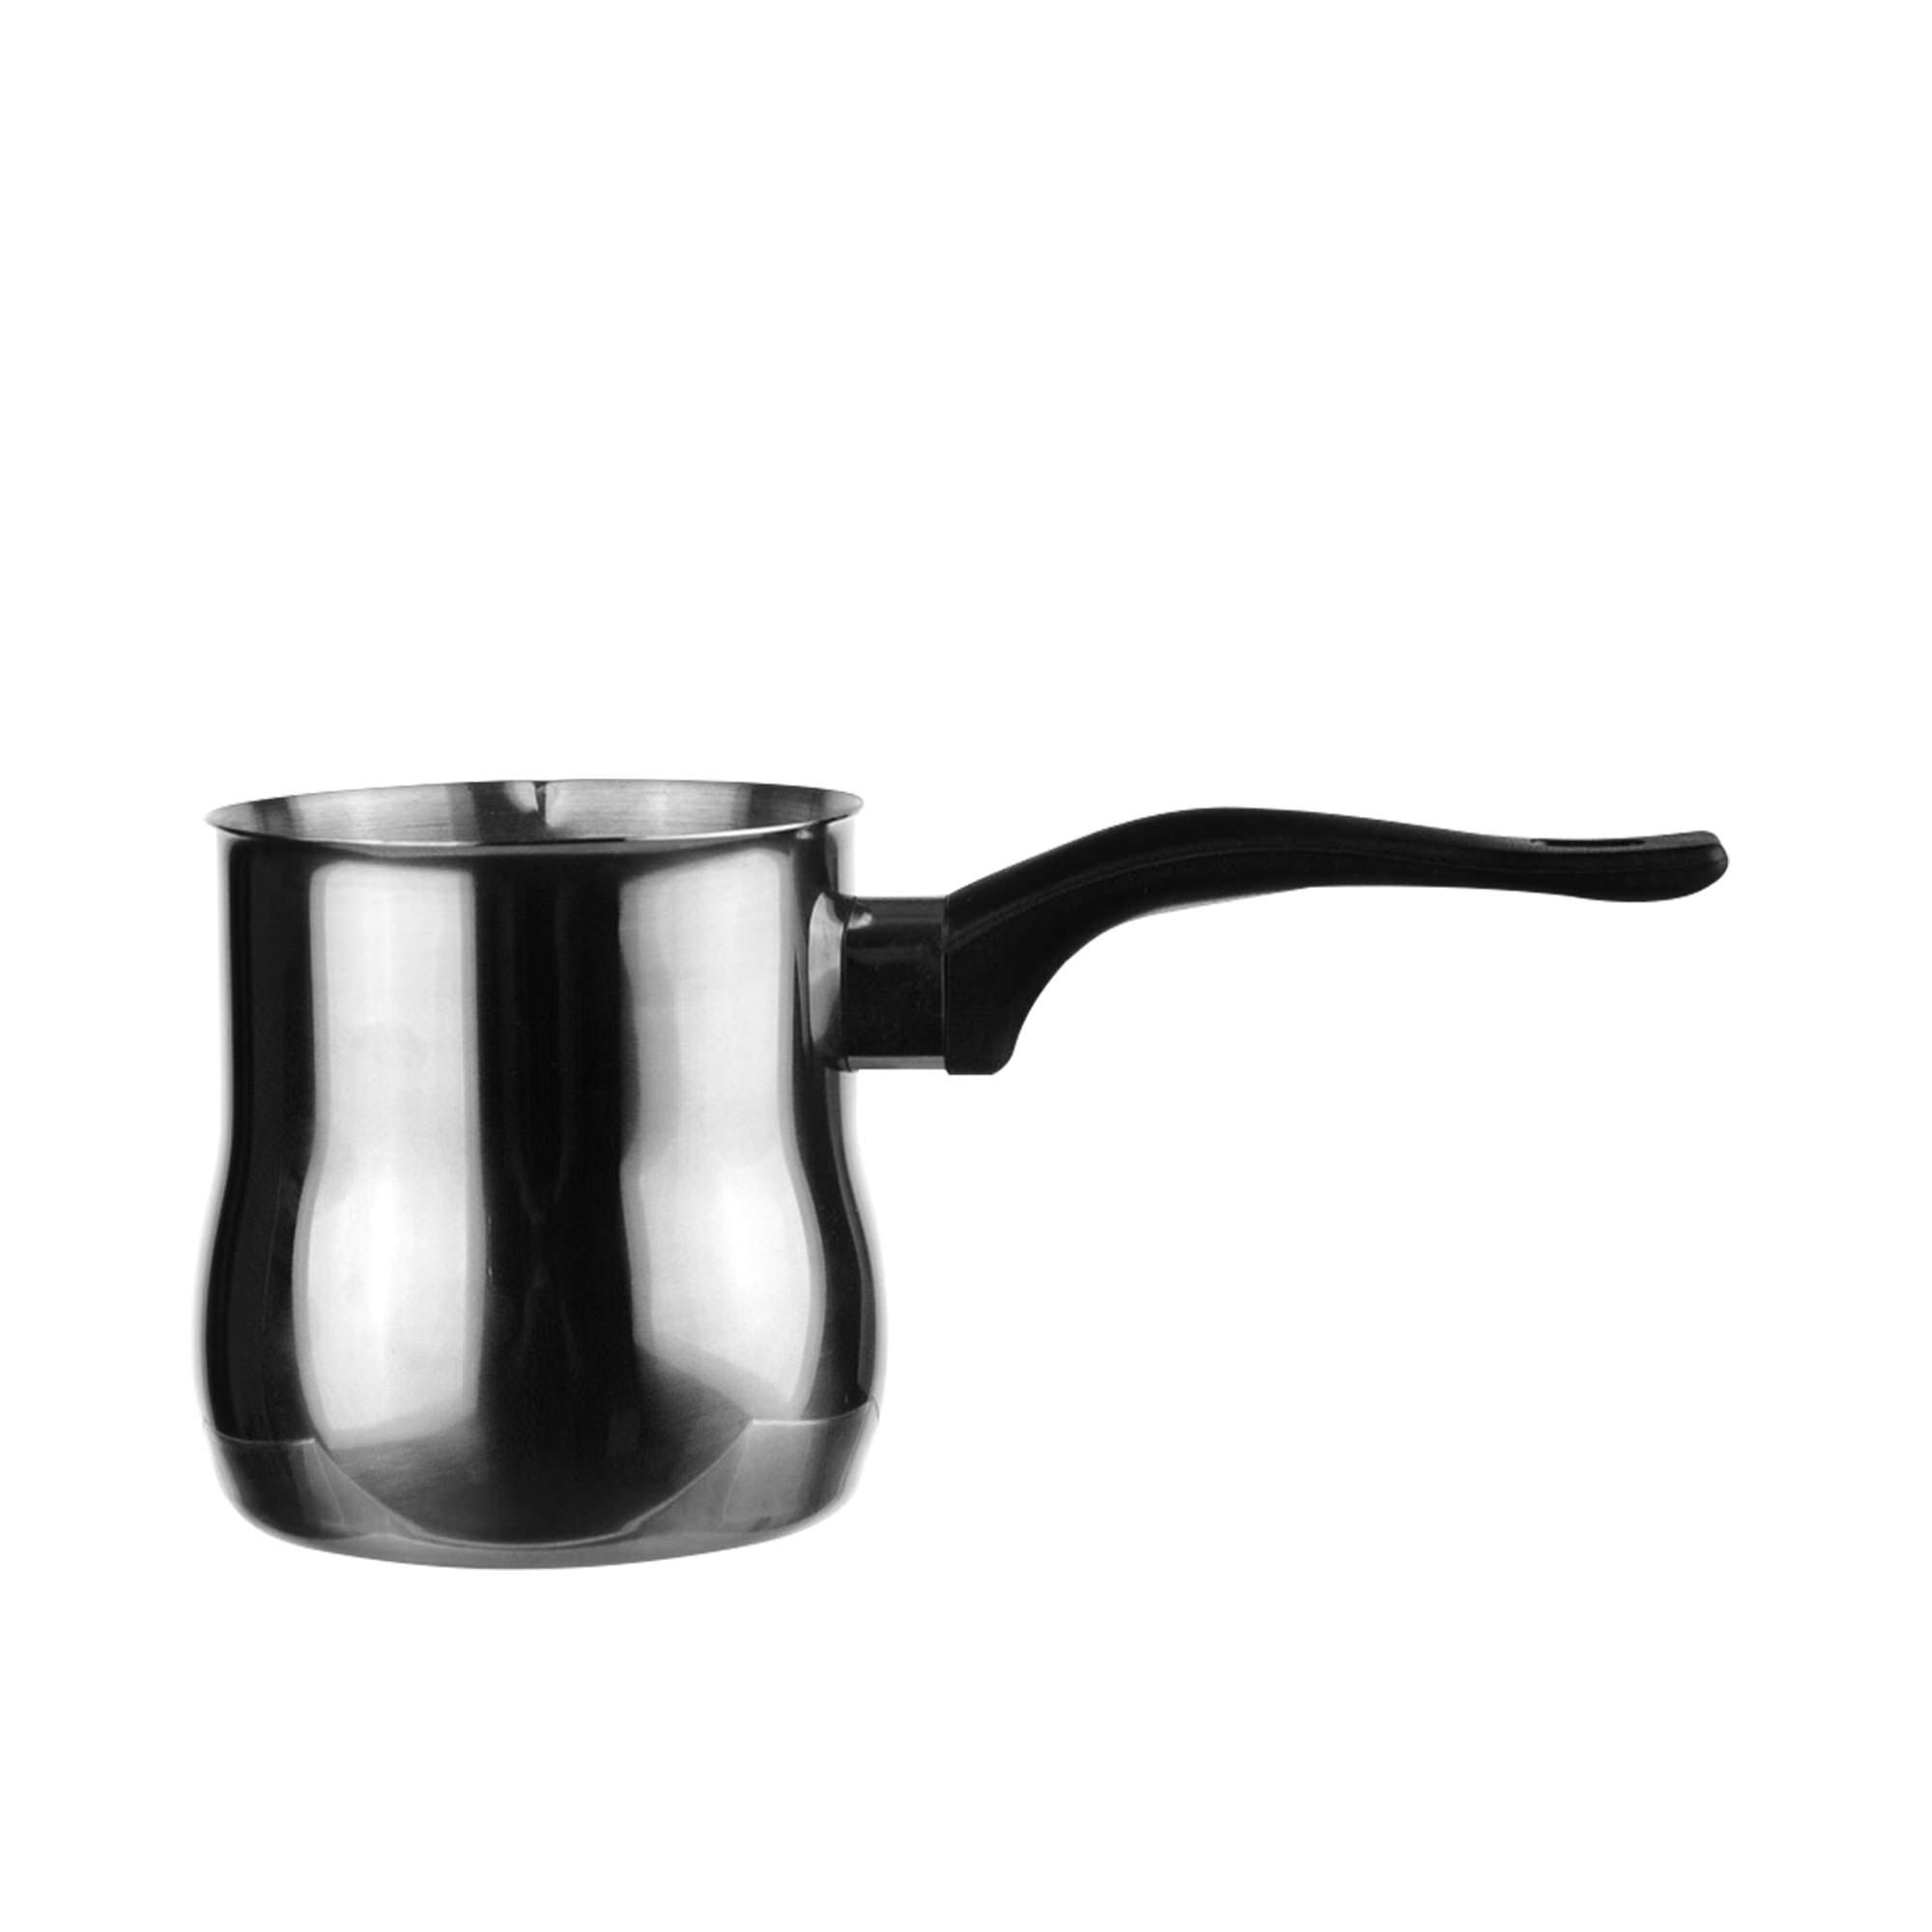 Coffee Culture Turkish Coffee Pot 520ml Stainless Steel Image 1